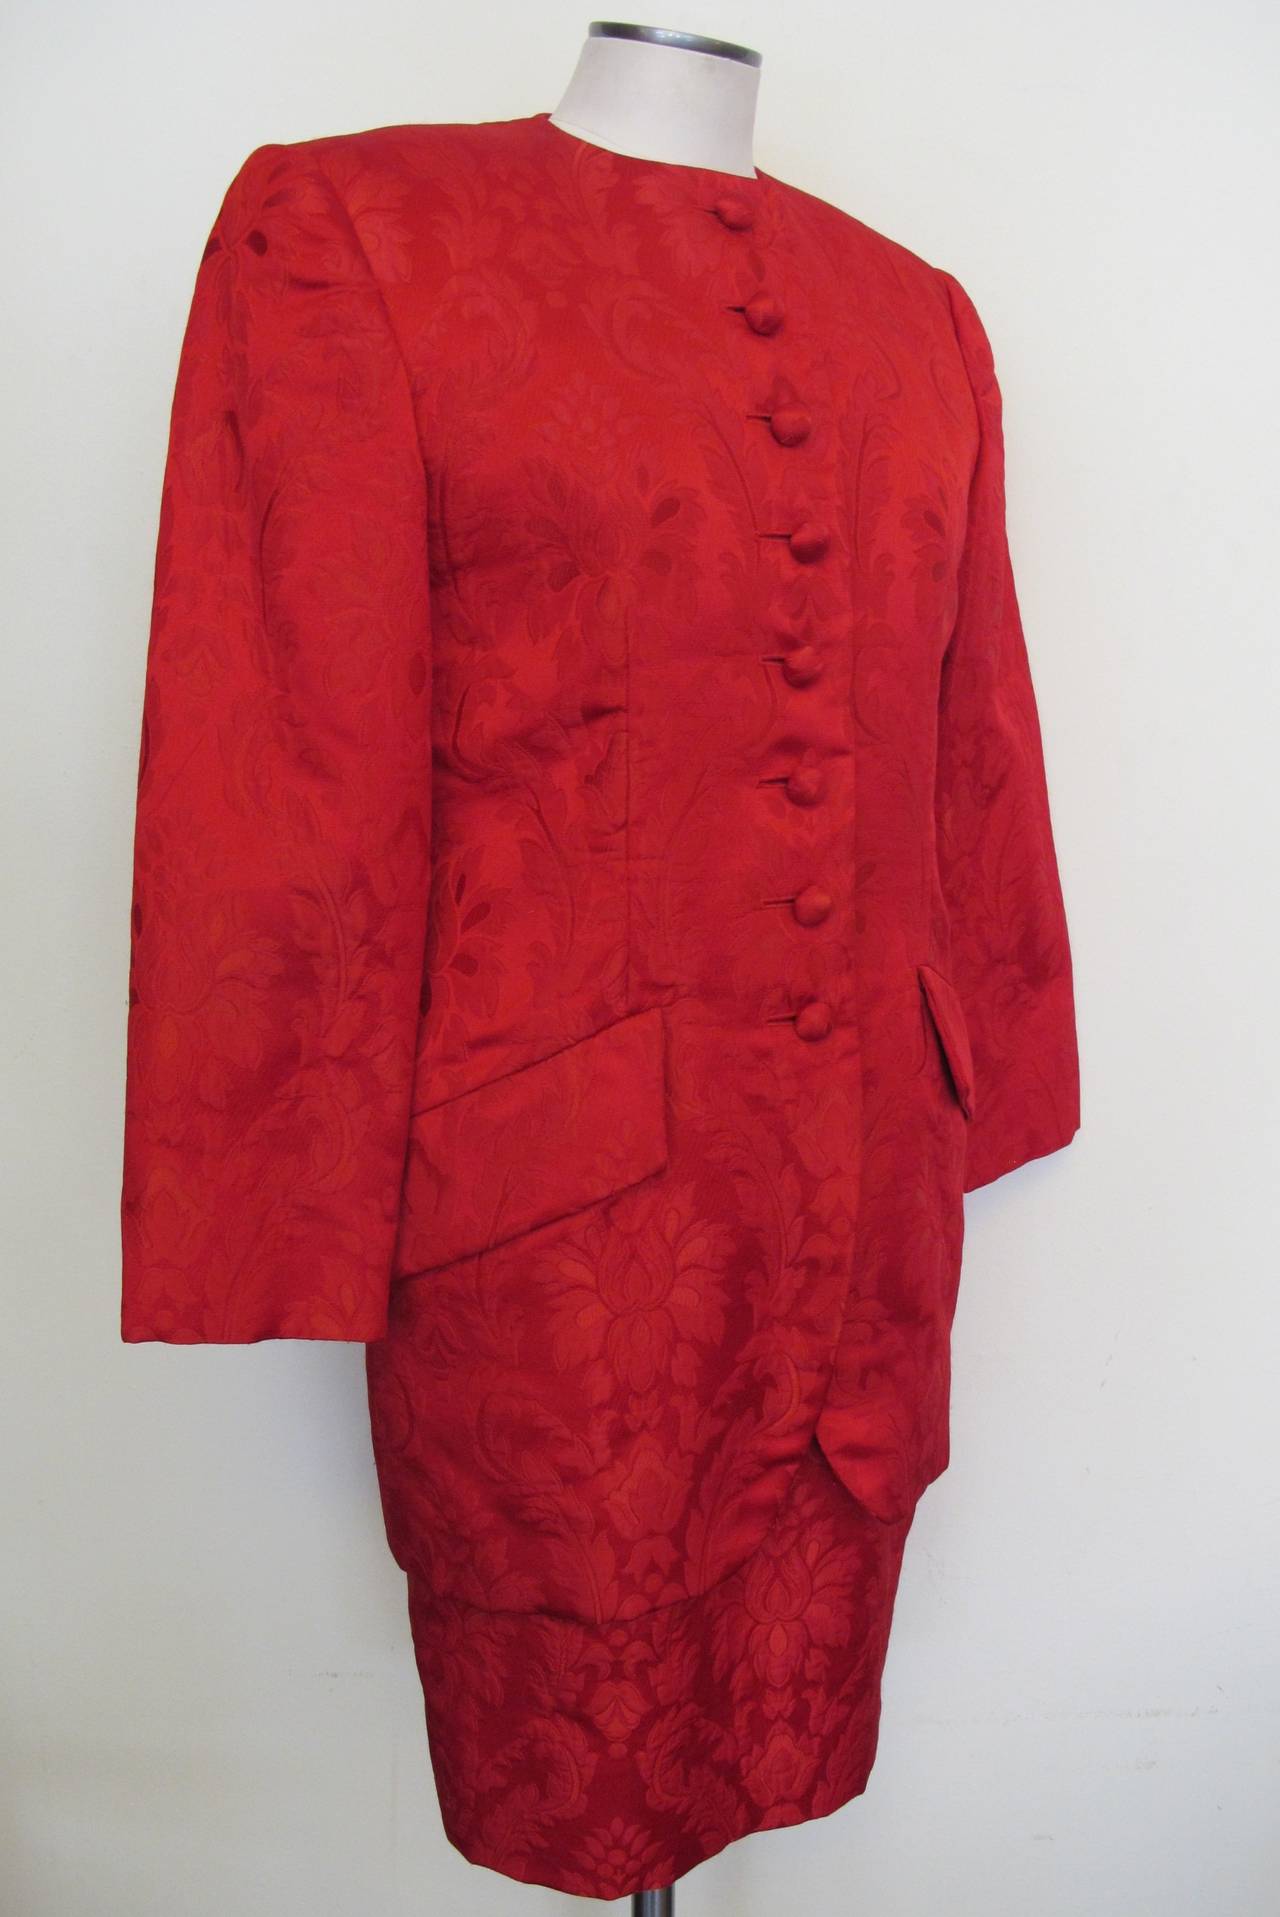 Carolyne Roehm created a stunning red ensemble. The jacket is a rich red brocade which has a tulip shape. It is enriched by eight covered buttons and 2 pockets. The red brocade is exquisite and the top of the dress is created with beautiful heavy